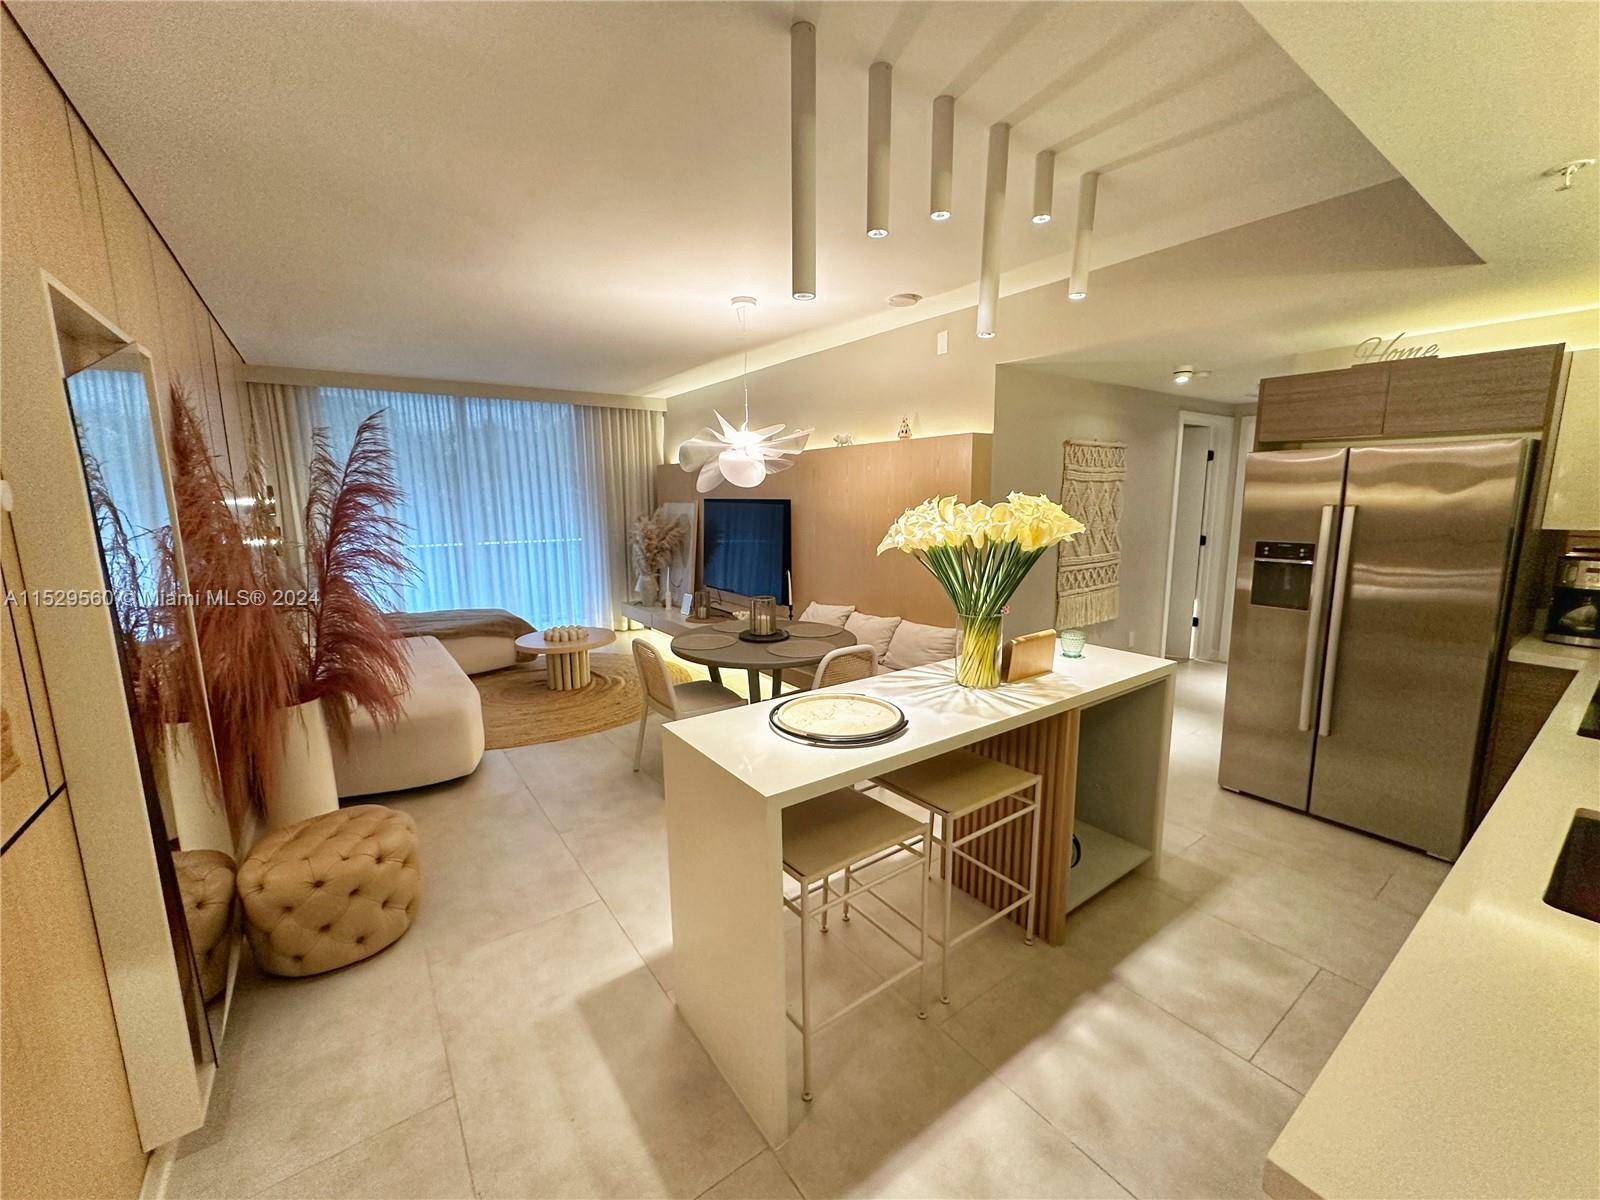 Immerse yourself in luxury with this turnkey 2BR 2BA condo, nestled in the vibrant heart of Brickell.